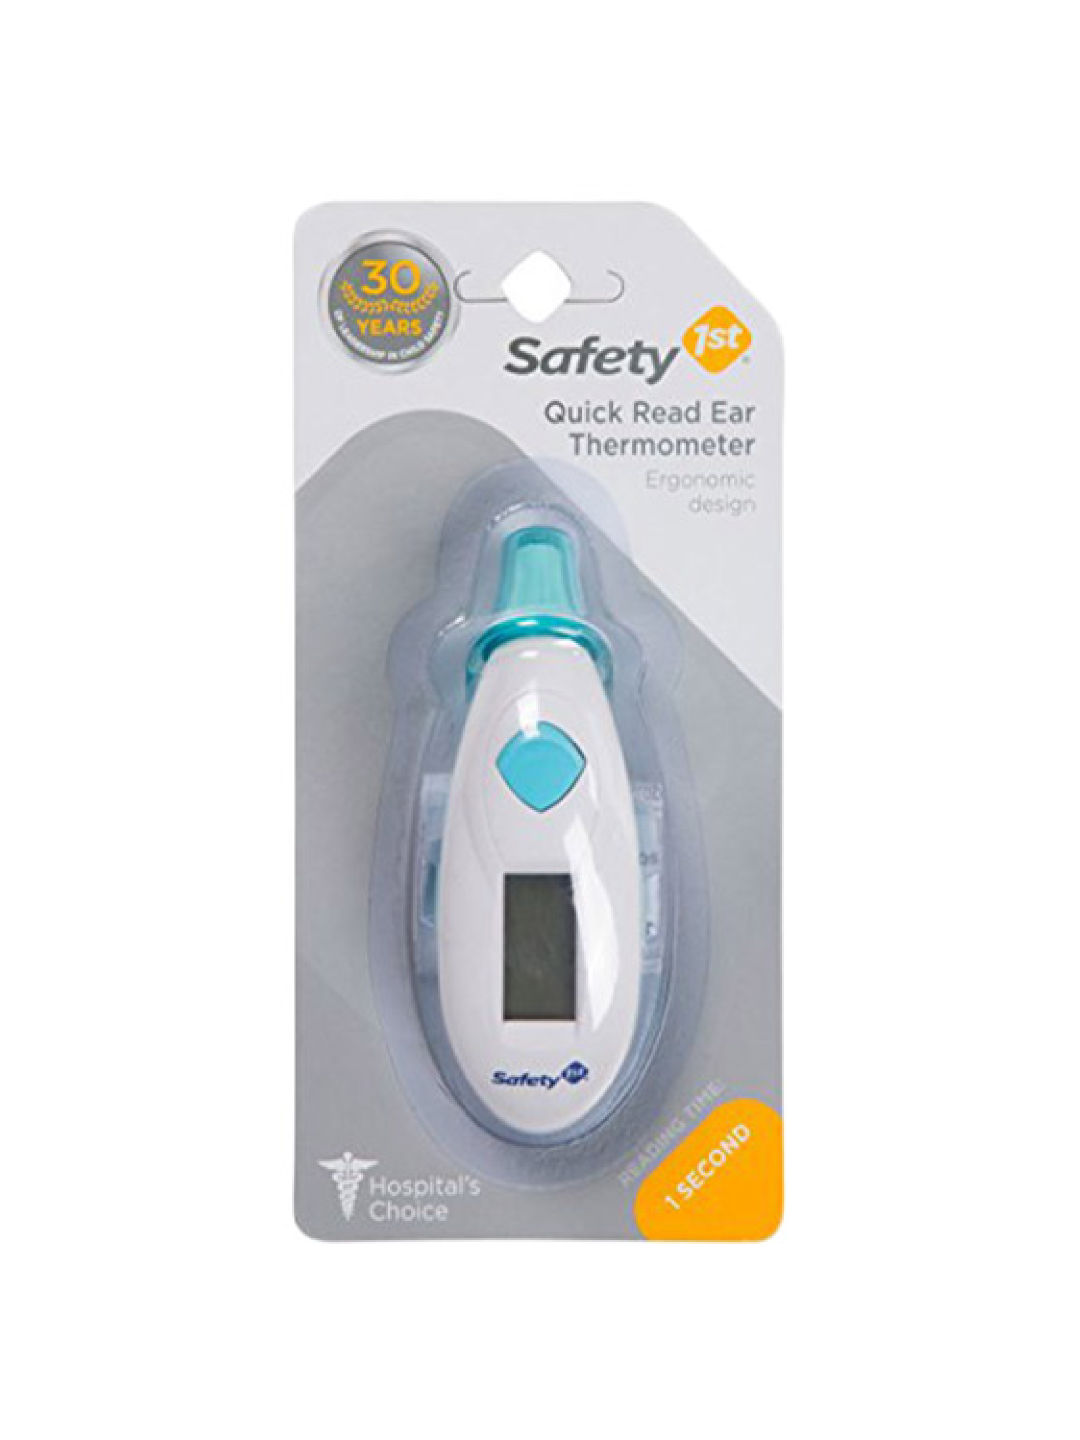 Safety 1st Quick Read Ear Thermometer (Blue- Image 2)